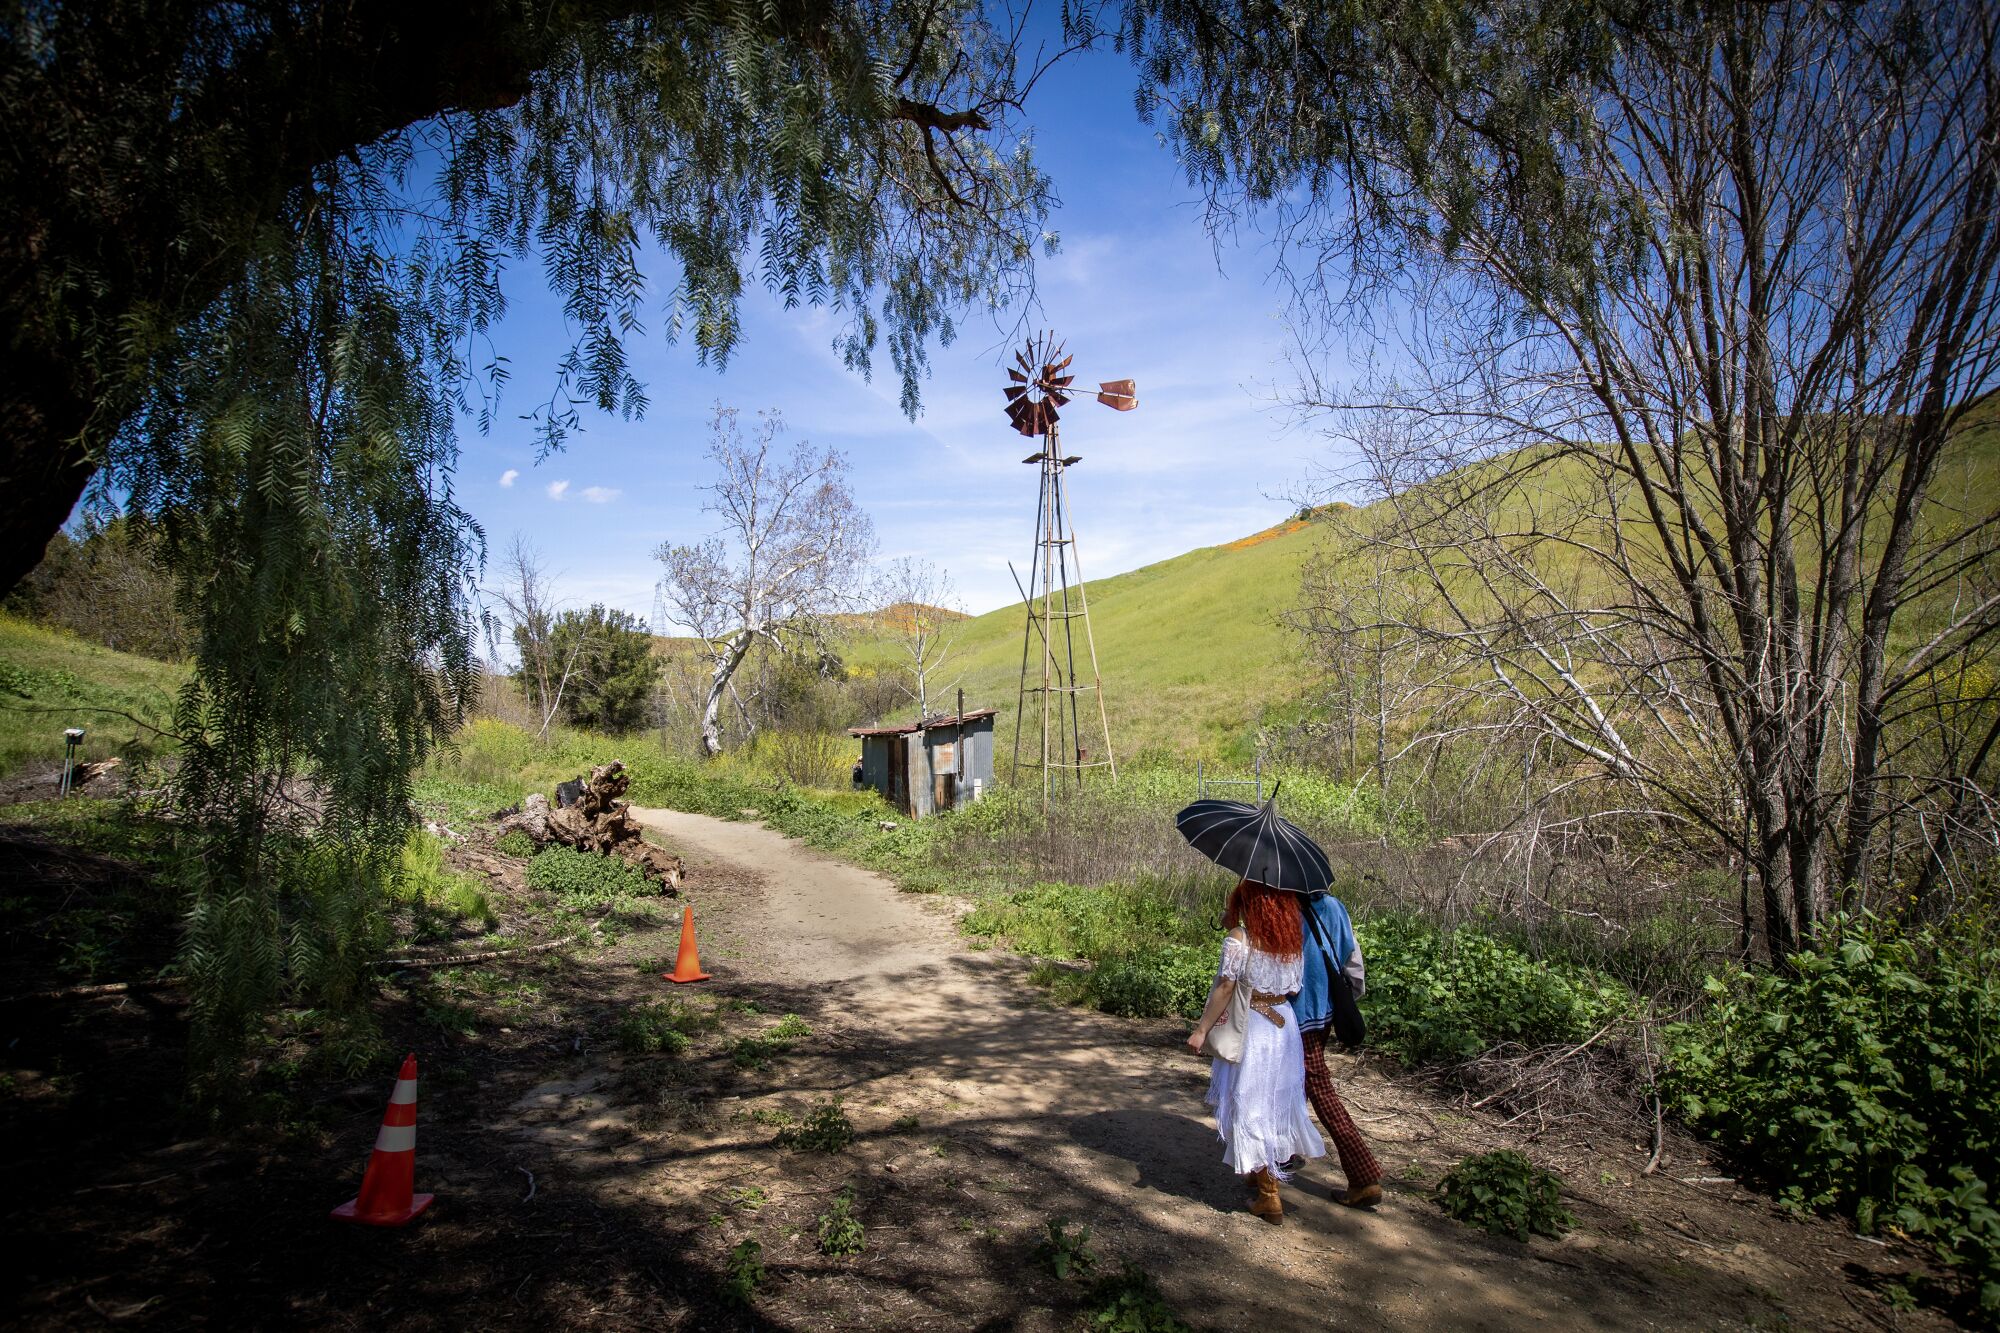 A couple huddled together under an umbrella passed a windmill on stilts;  walking on the winding road among the green hills 